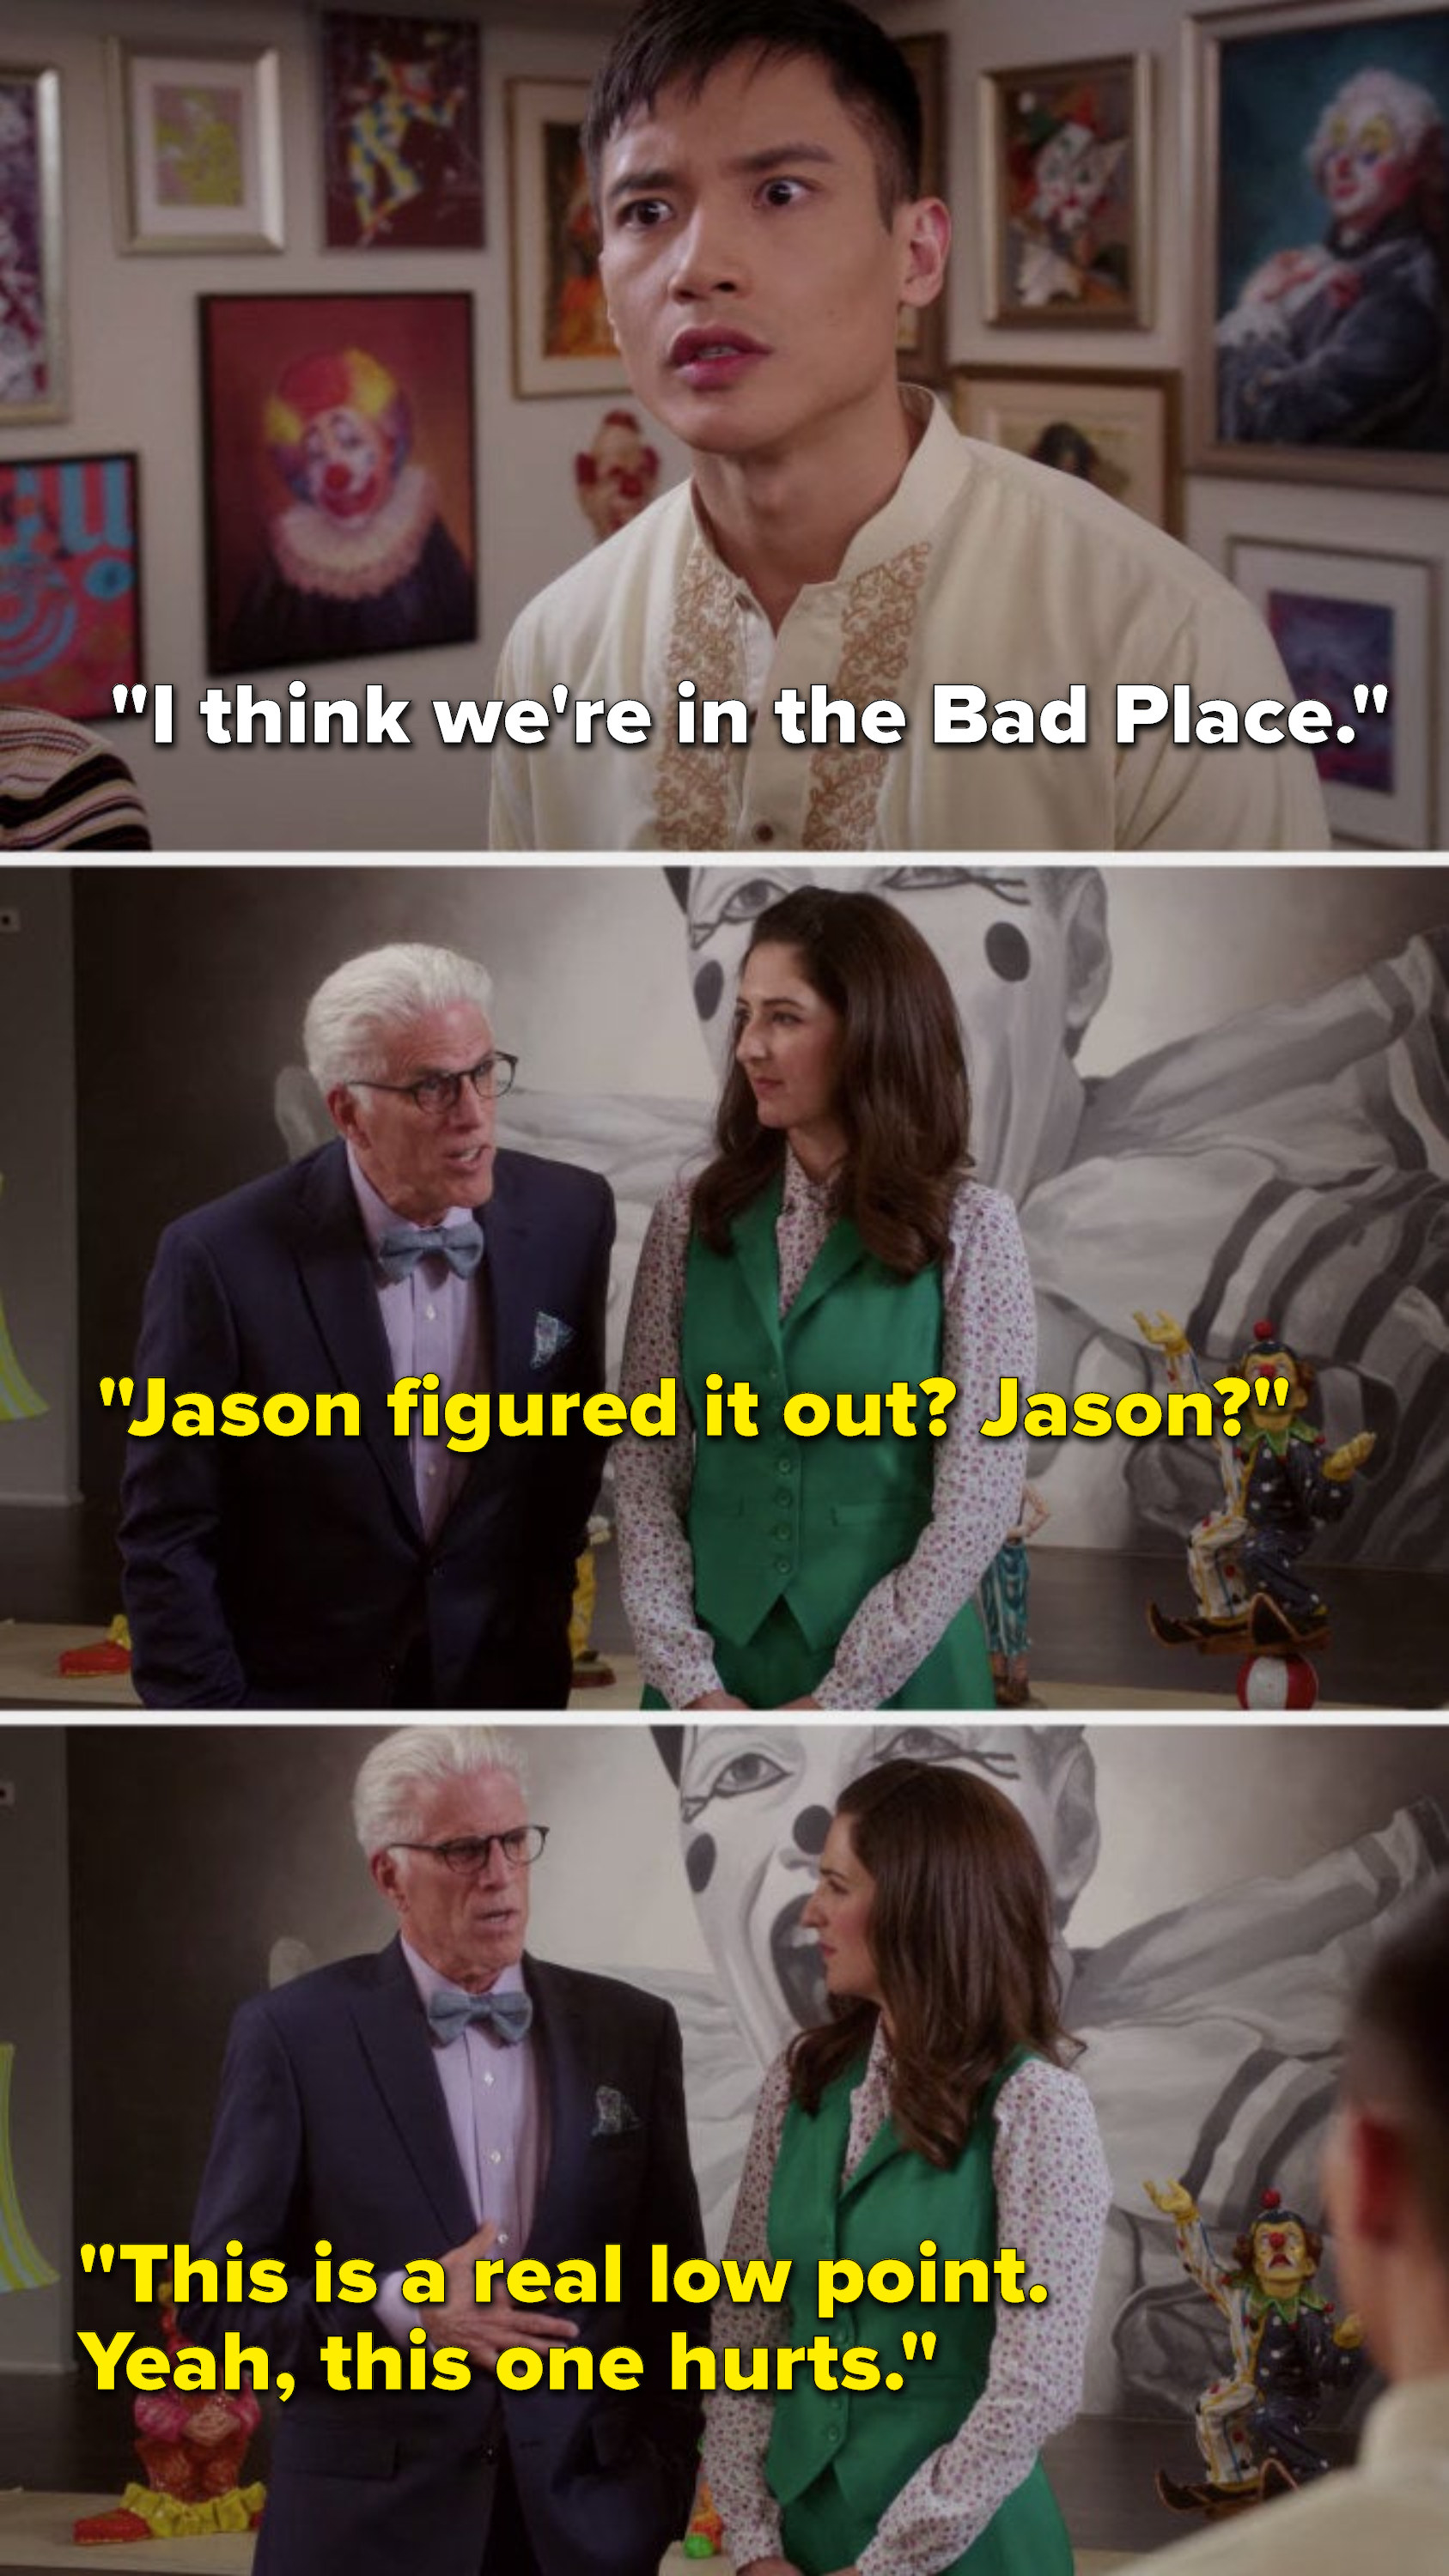 Jason says, &quot;I think we&#x27;re in the Bad Place,&quot; and Michael says, &quot;Jason figured it out, Jason, this is a real low point, yeah, this one hurts&quot;